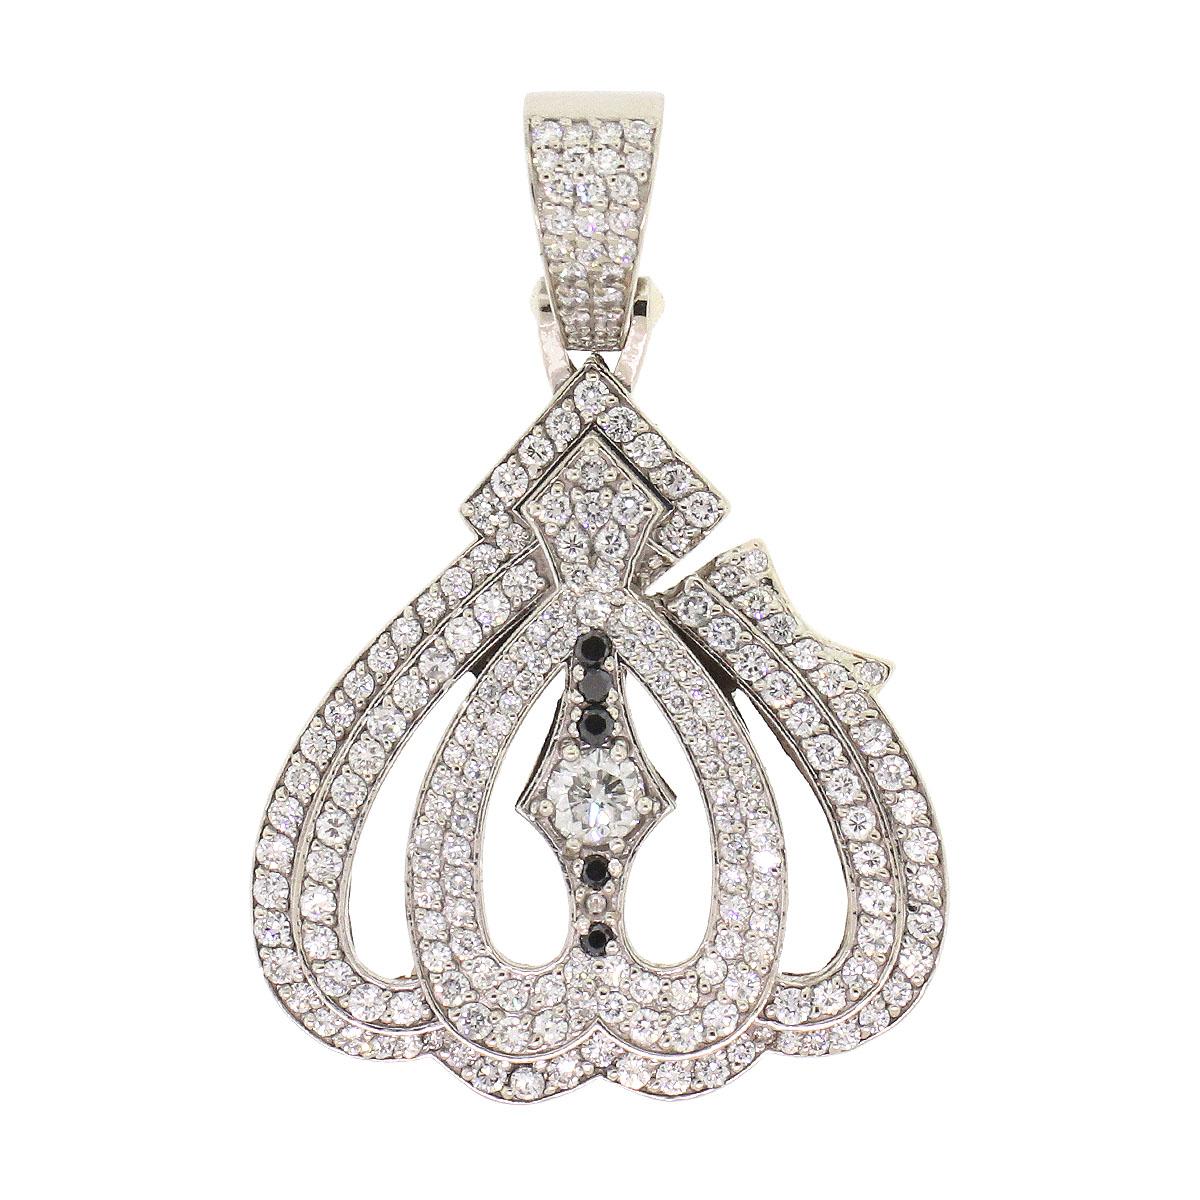 This stunning piece features approximately 5ctw of round cut Diamonds, meticulously set in a luxurious 14k white gold pendant. With its unique design and meaningful symbol, it's the perfect accessory for adding elegance and spirituality to any